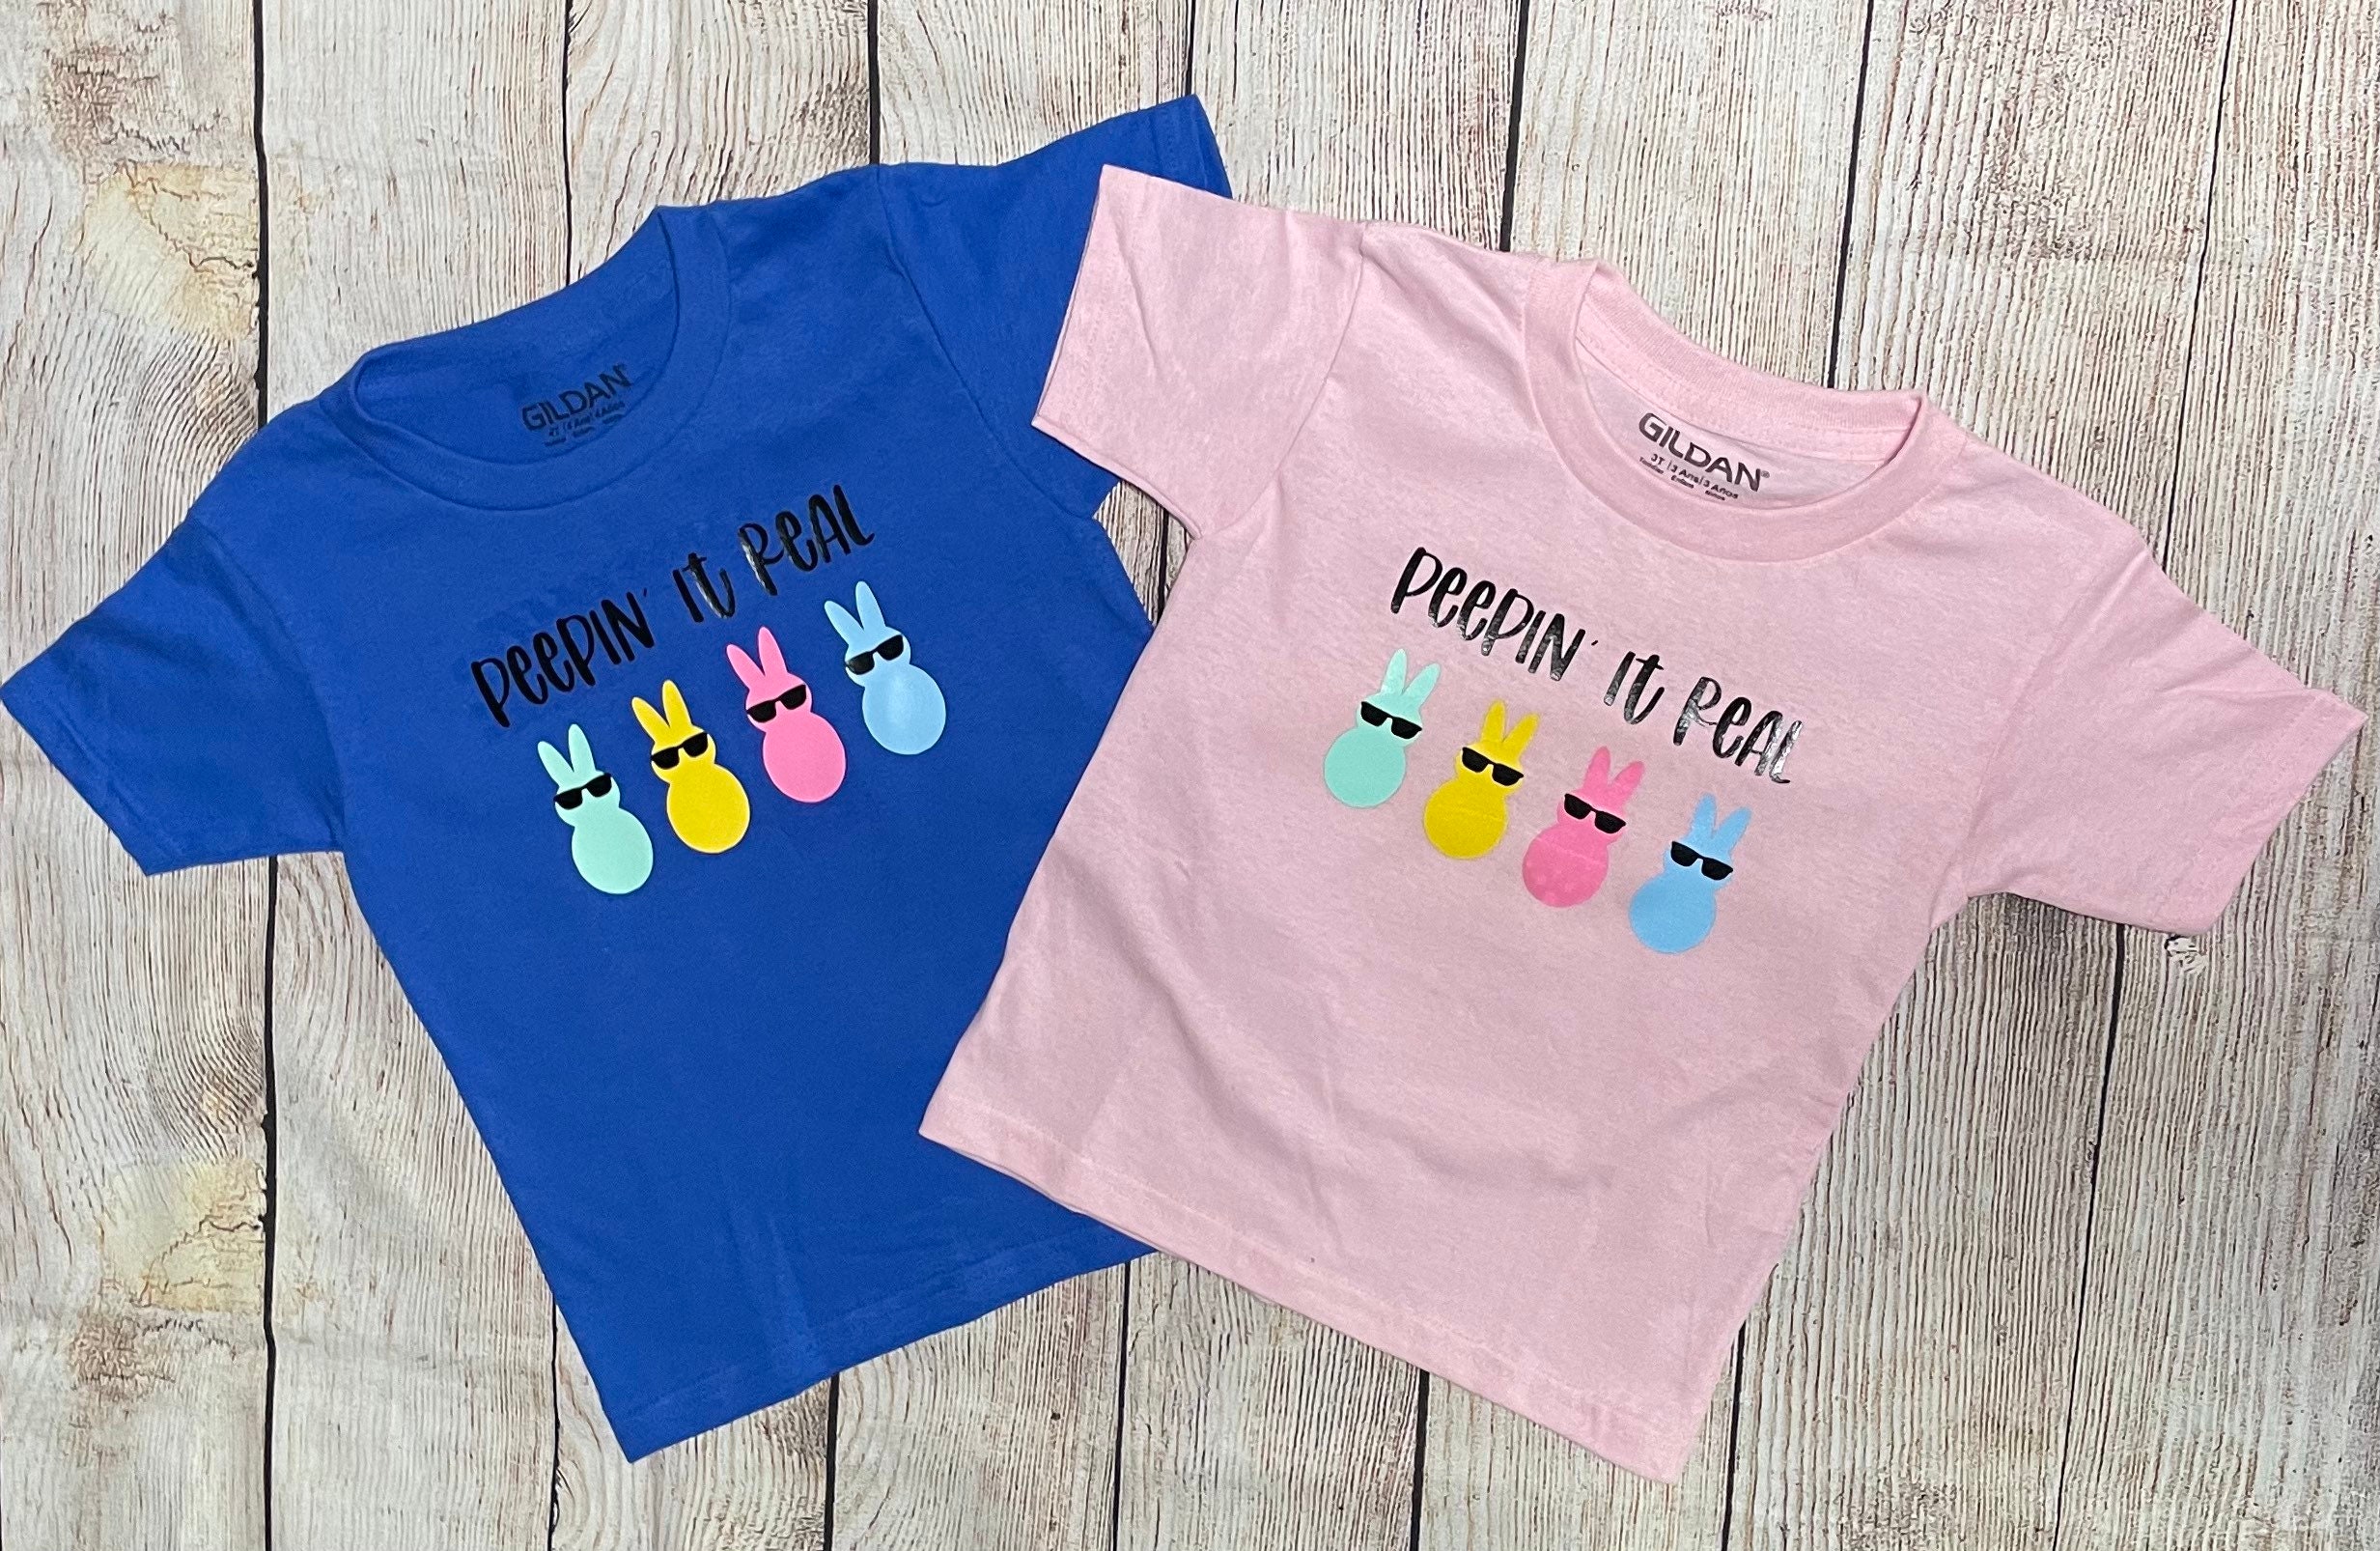 Kleding Jongenskleding Tops & T-shirts T-shirts sibling Easter shirts Easter Shirts for Girls monogram bunny shirt Easter Shirts for boys matching brother sister Easter outfits 